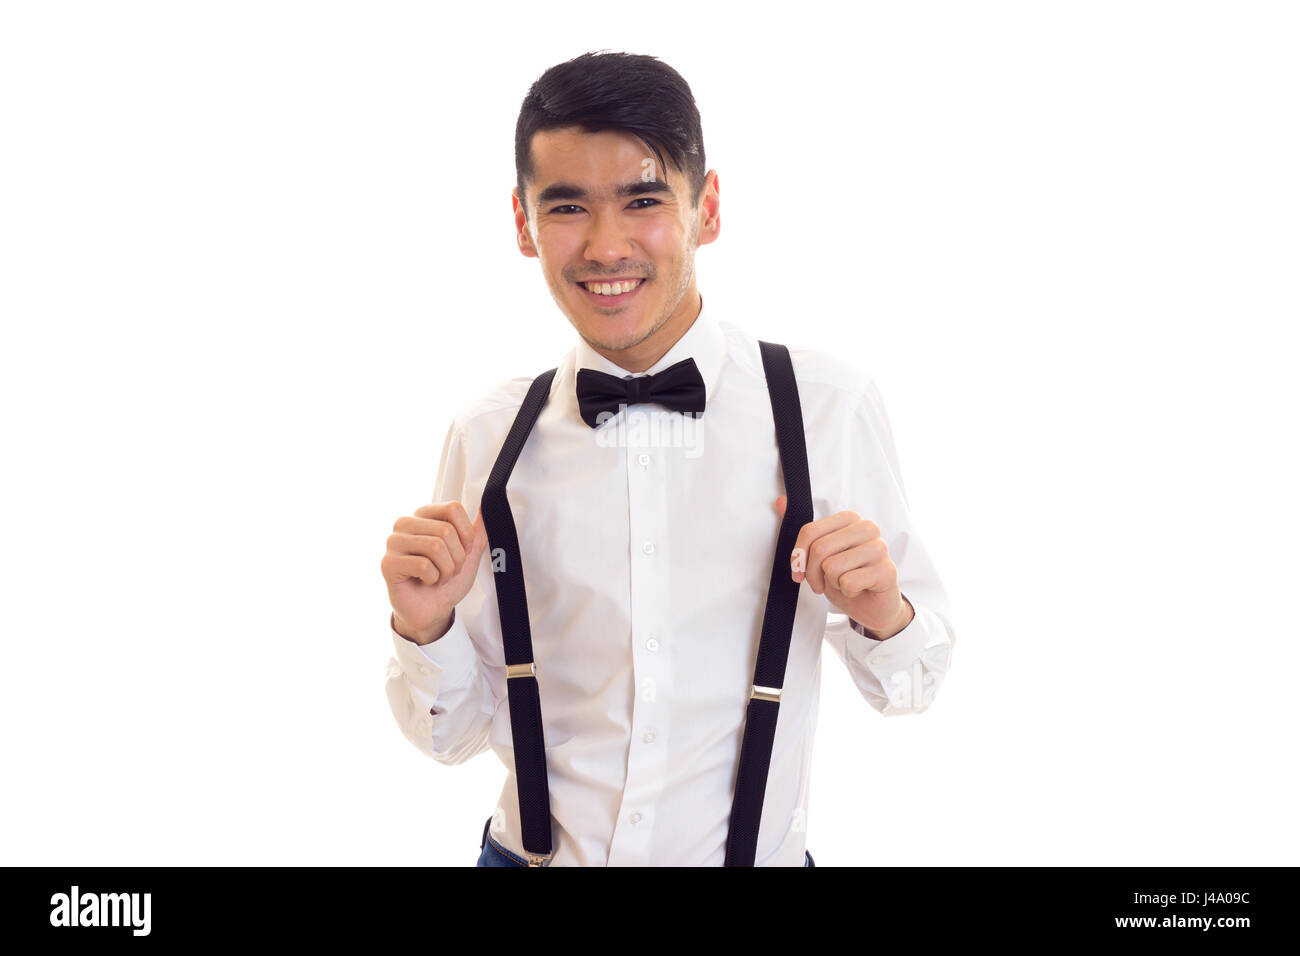 Young man with bow-tie and suspenders Stock Photo